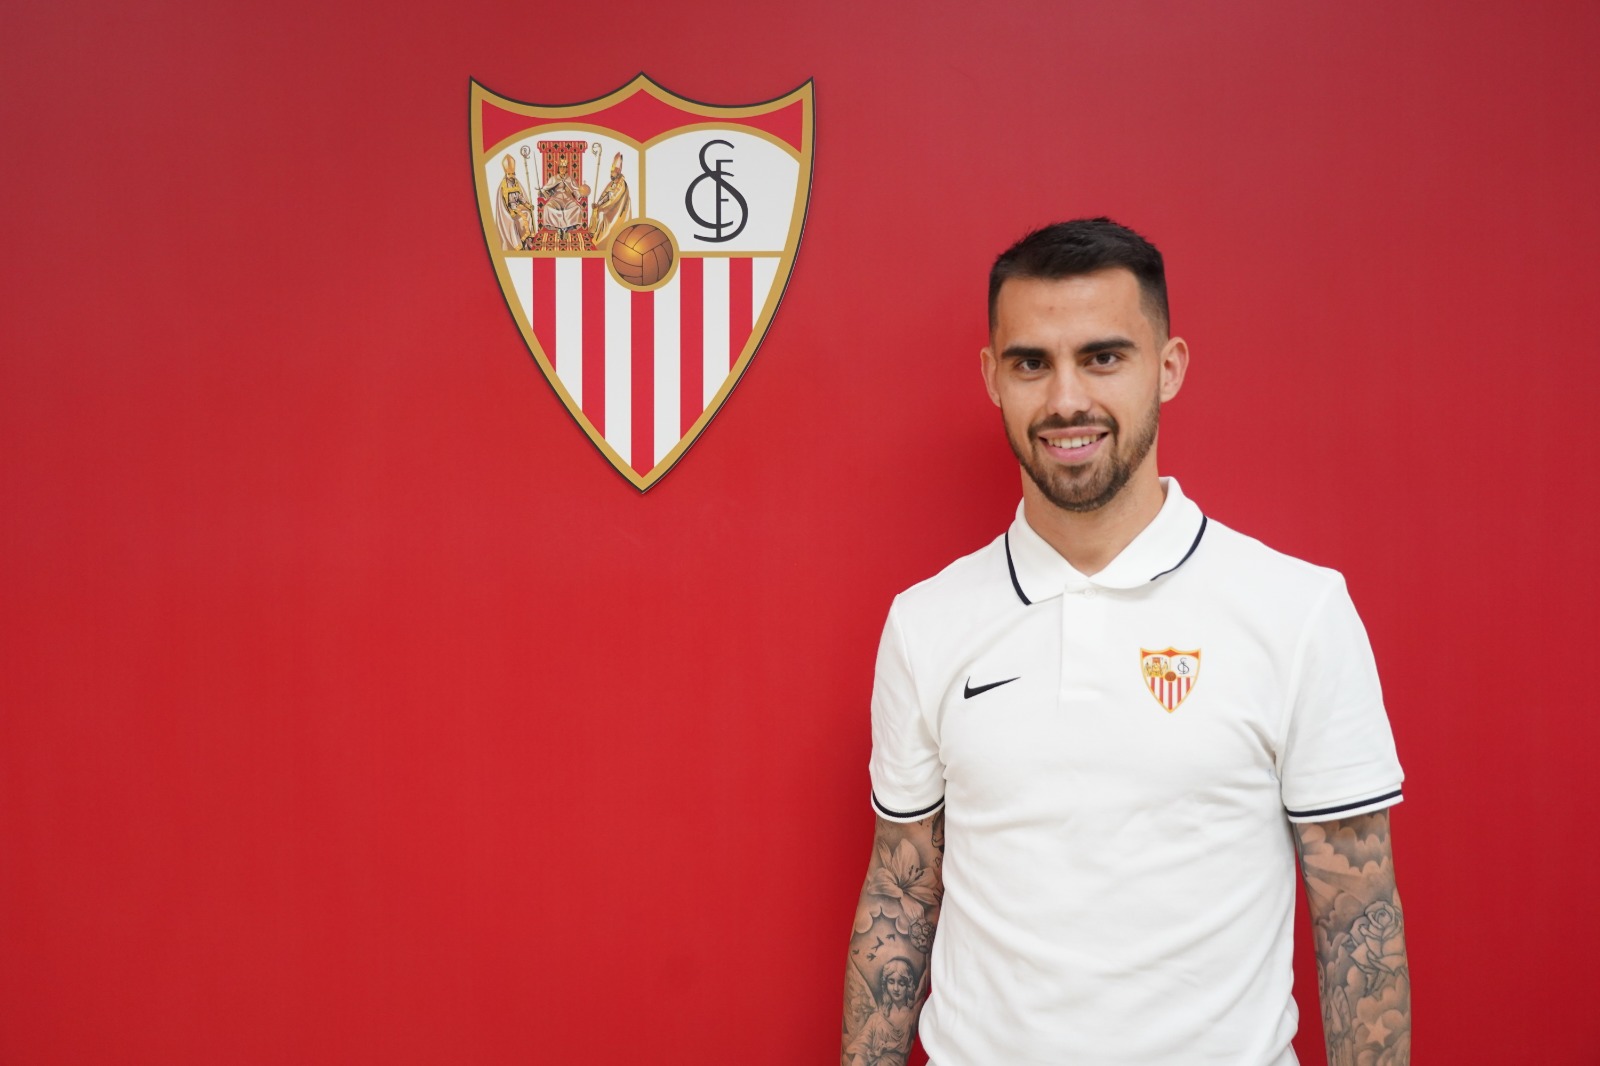 Suso poses as Sevilla FC's newest signing